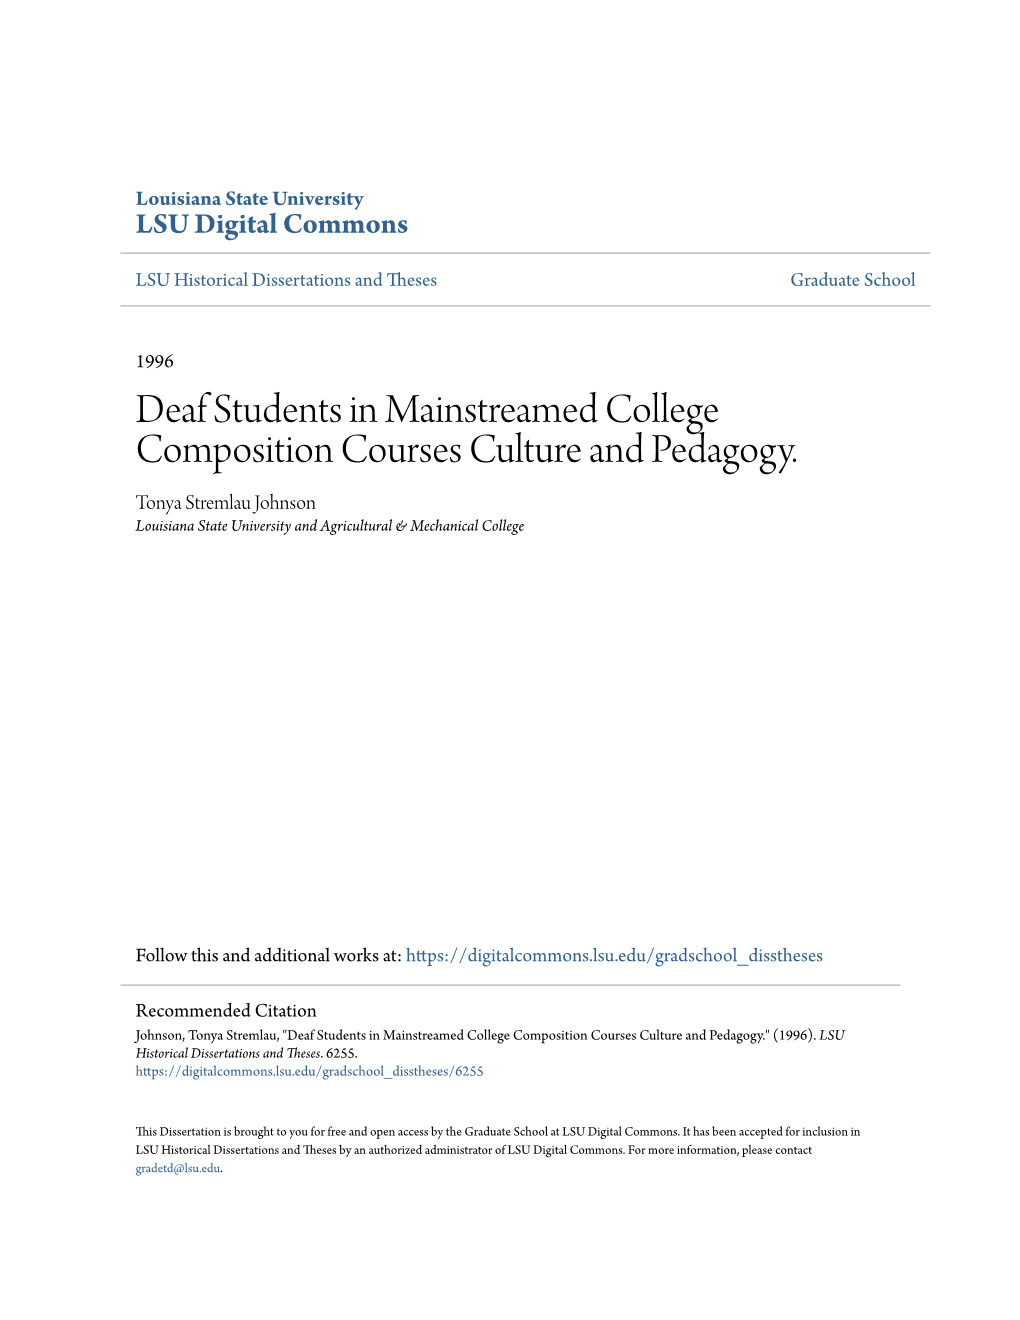 Deaf Students in Mainstreamed College Composition Courses Culture and Pedagogy